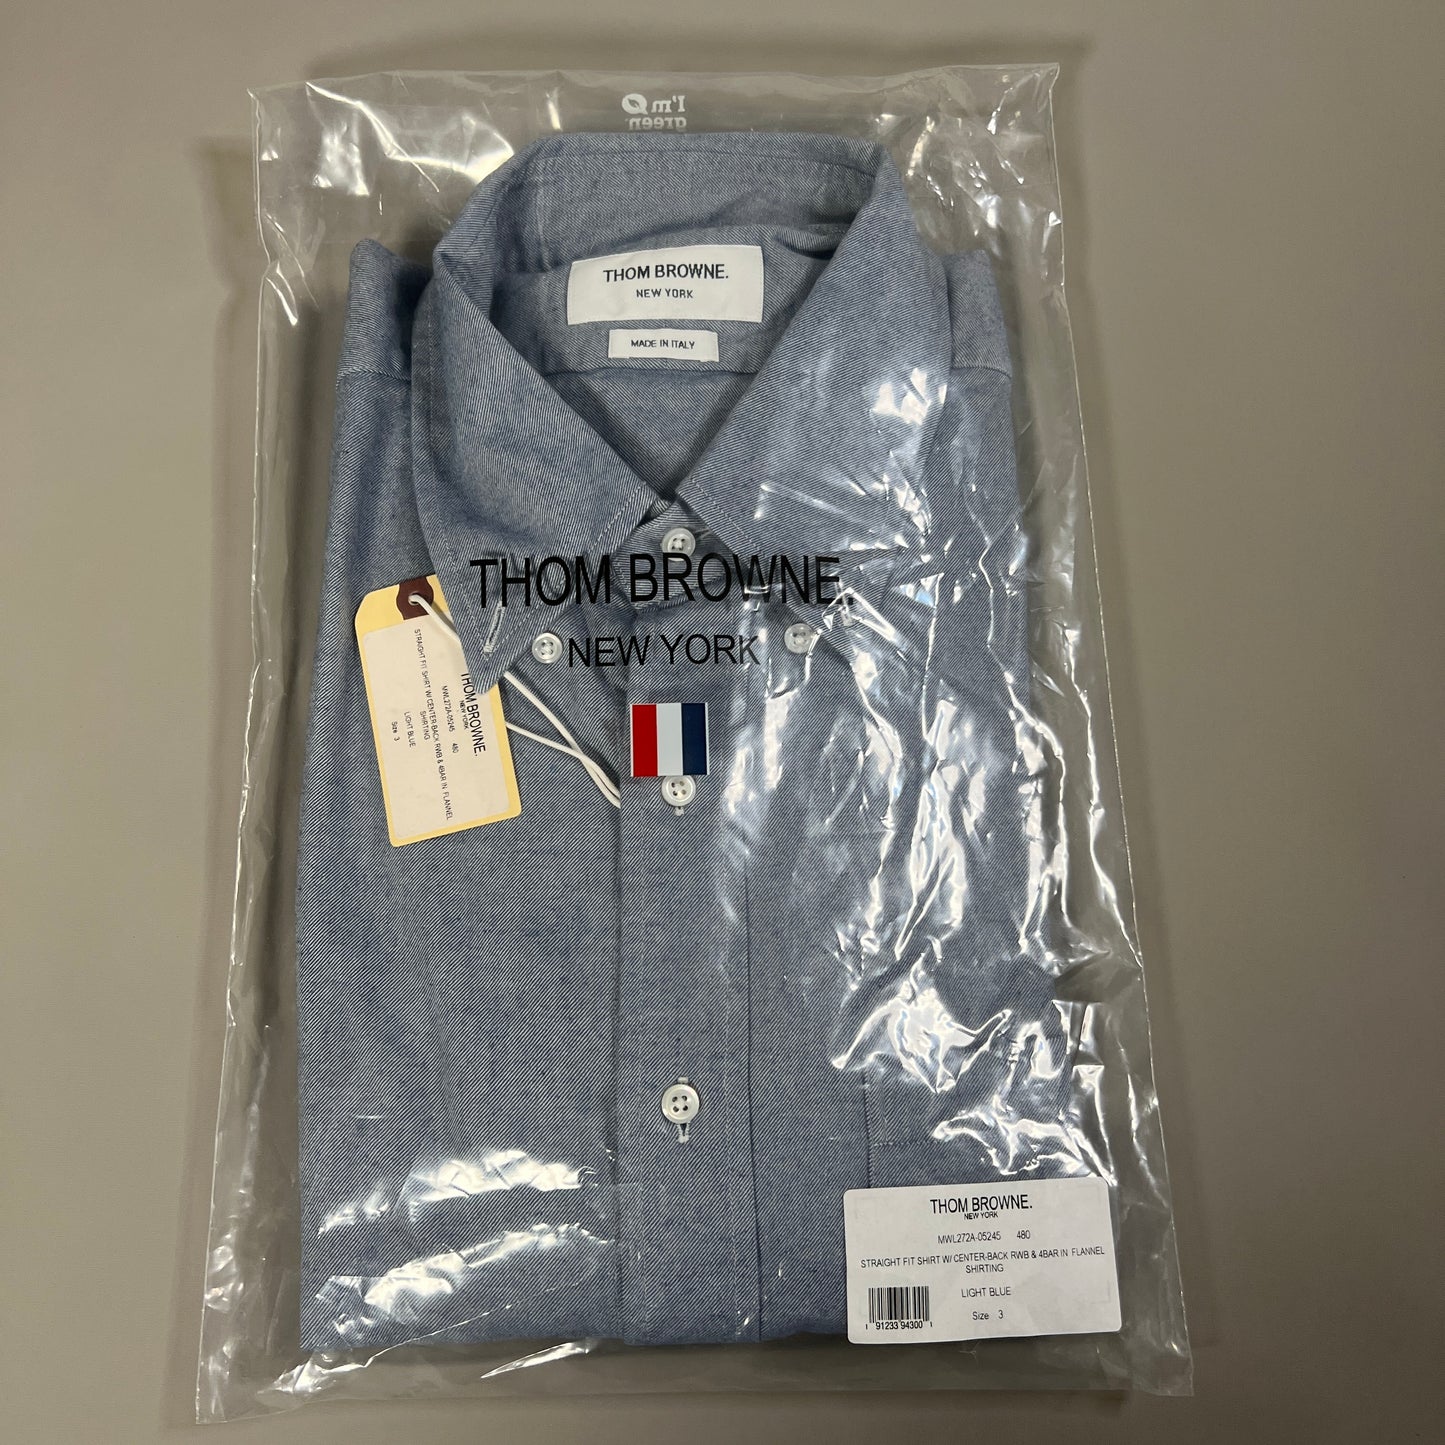 THOM BROWNE Straight Fit BD LS Shirt w/CB RWB GG in Solid Flannel w/woven 4 Bar Stripe in Light Blue Size 3 (NEW)